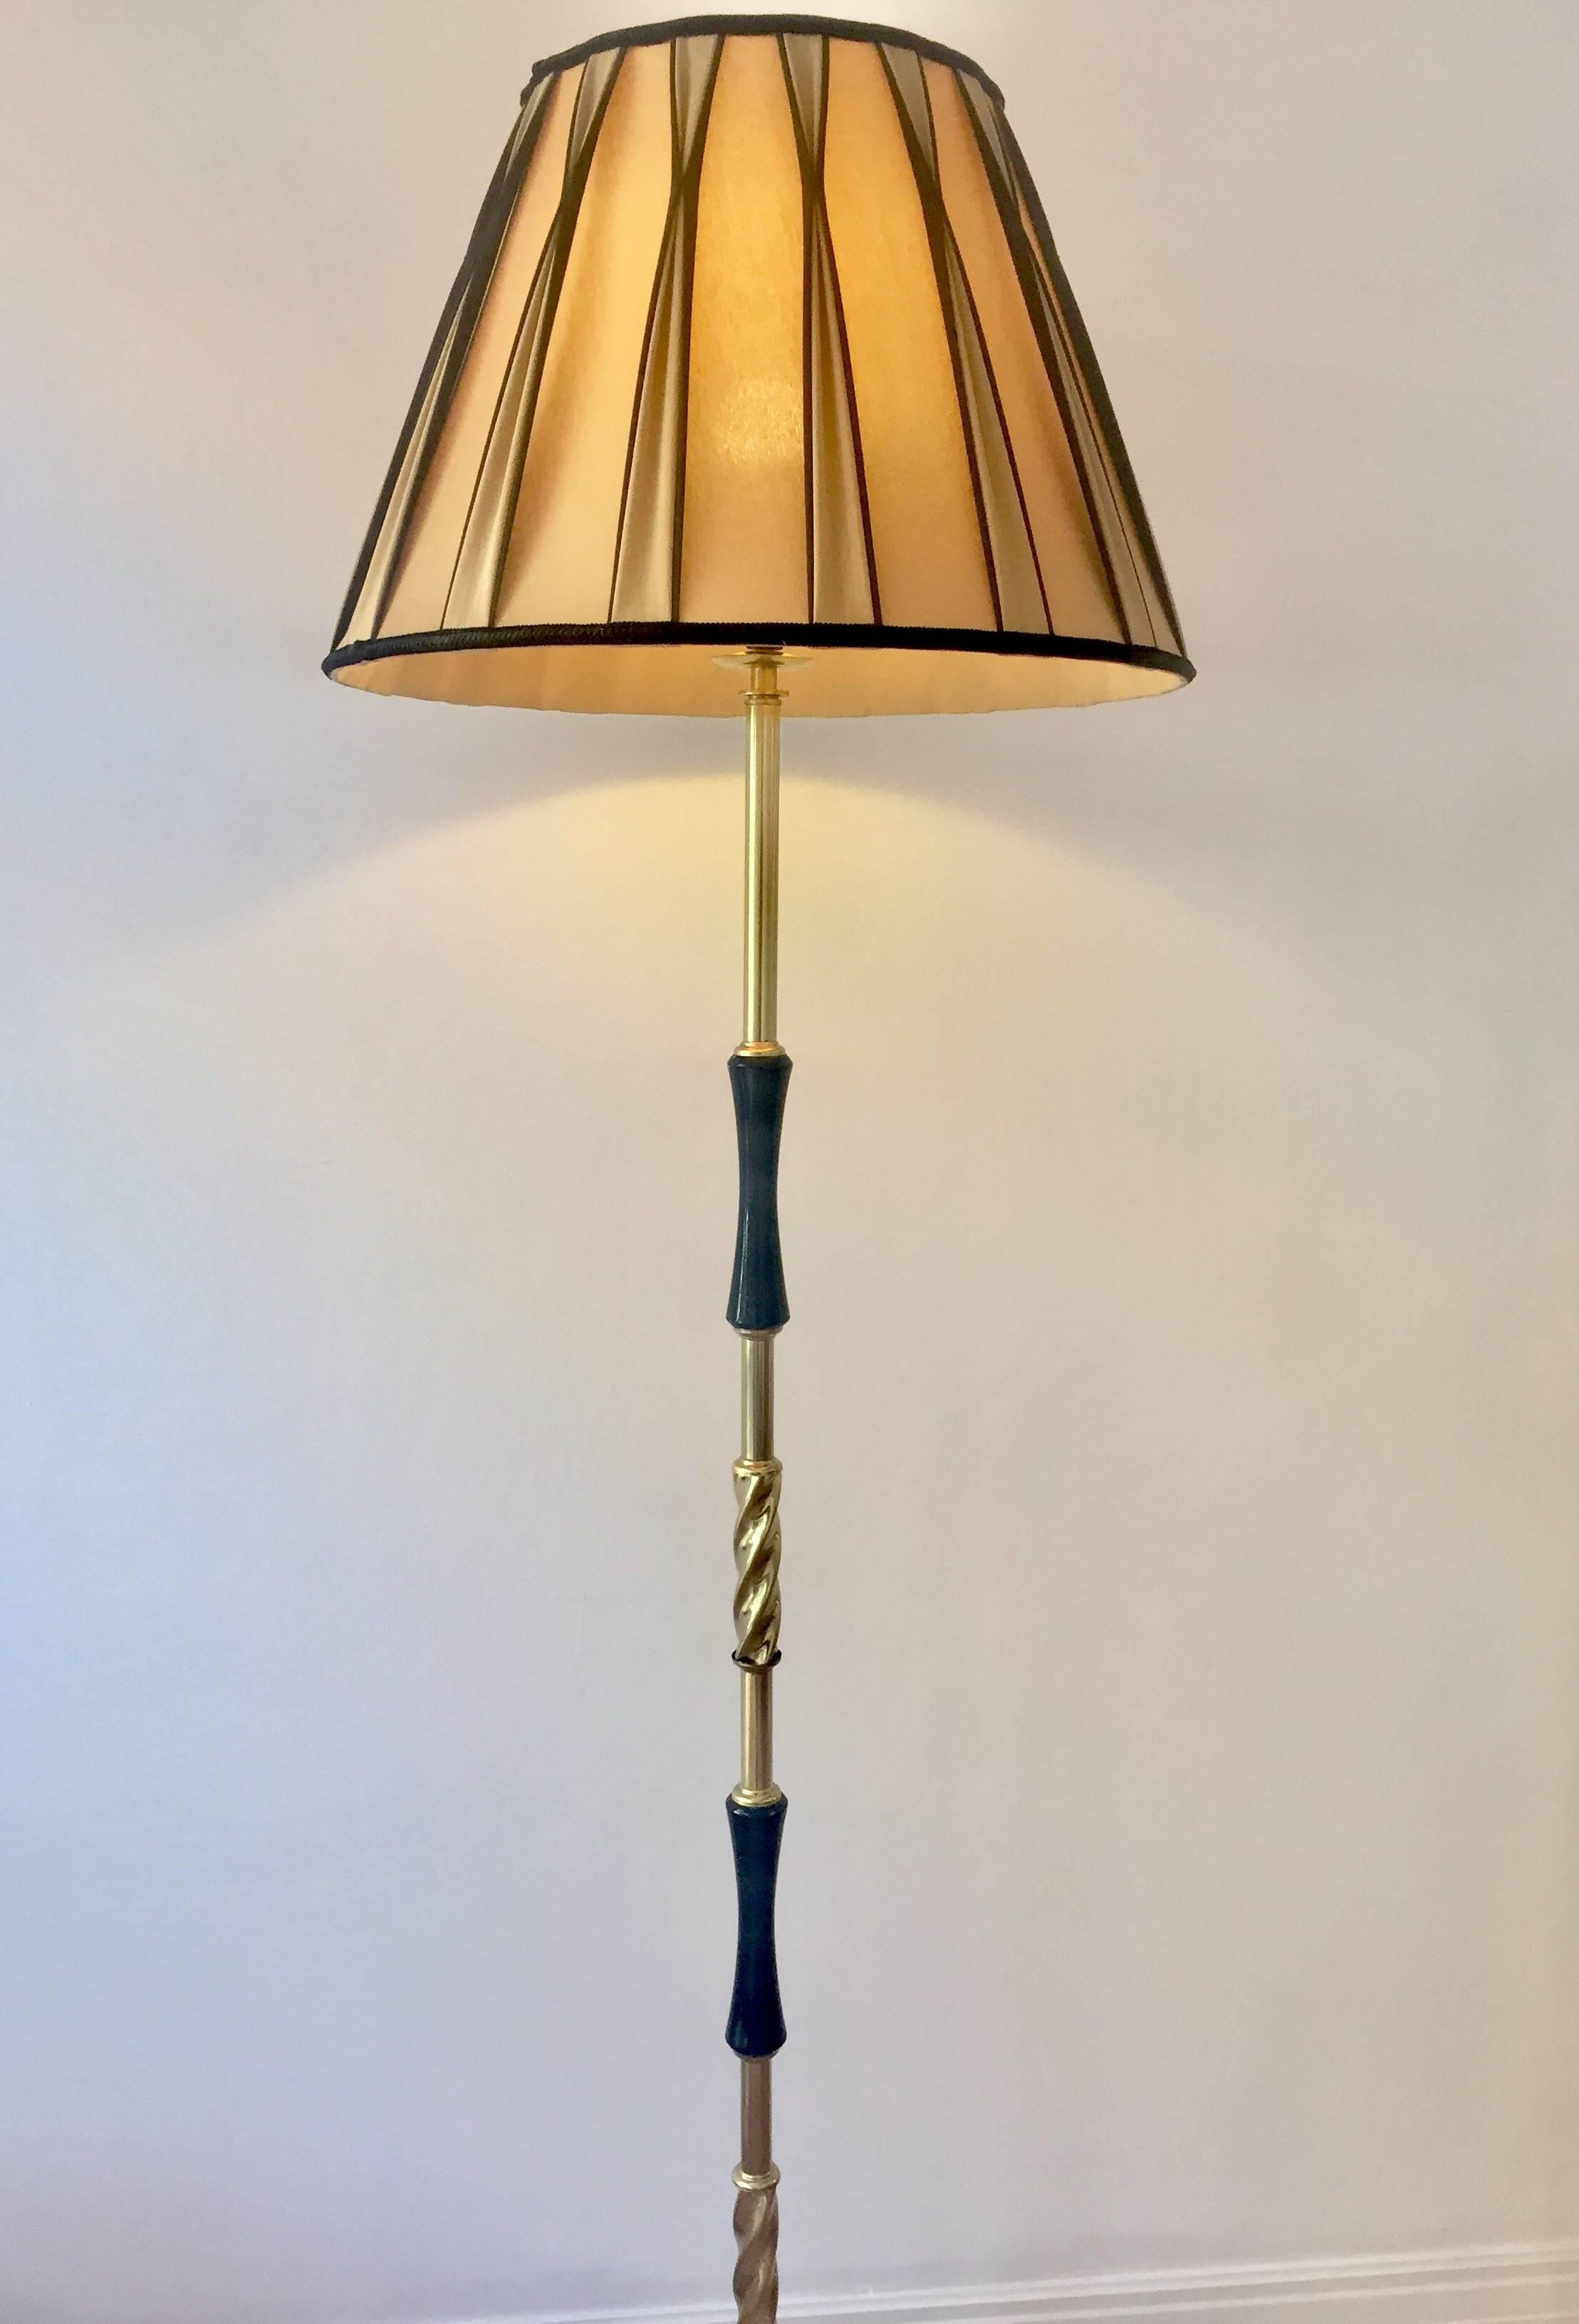 Stylish Mid-Century, Italian Barley twist brass and ebonized wood floor lamp. The marble base is original in a subtle mustard tone,rewired for Australian use with new high quality Crompton's shade and ready to grace any room in your house.